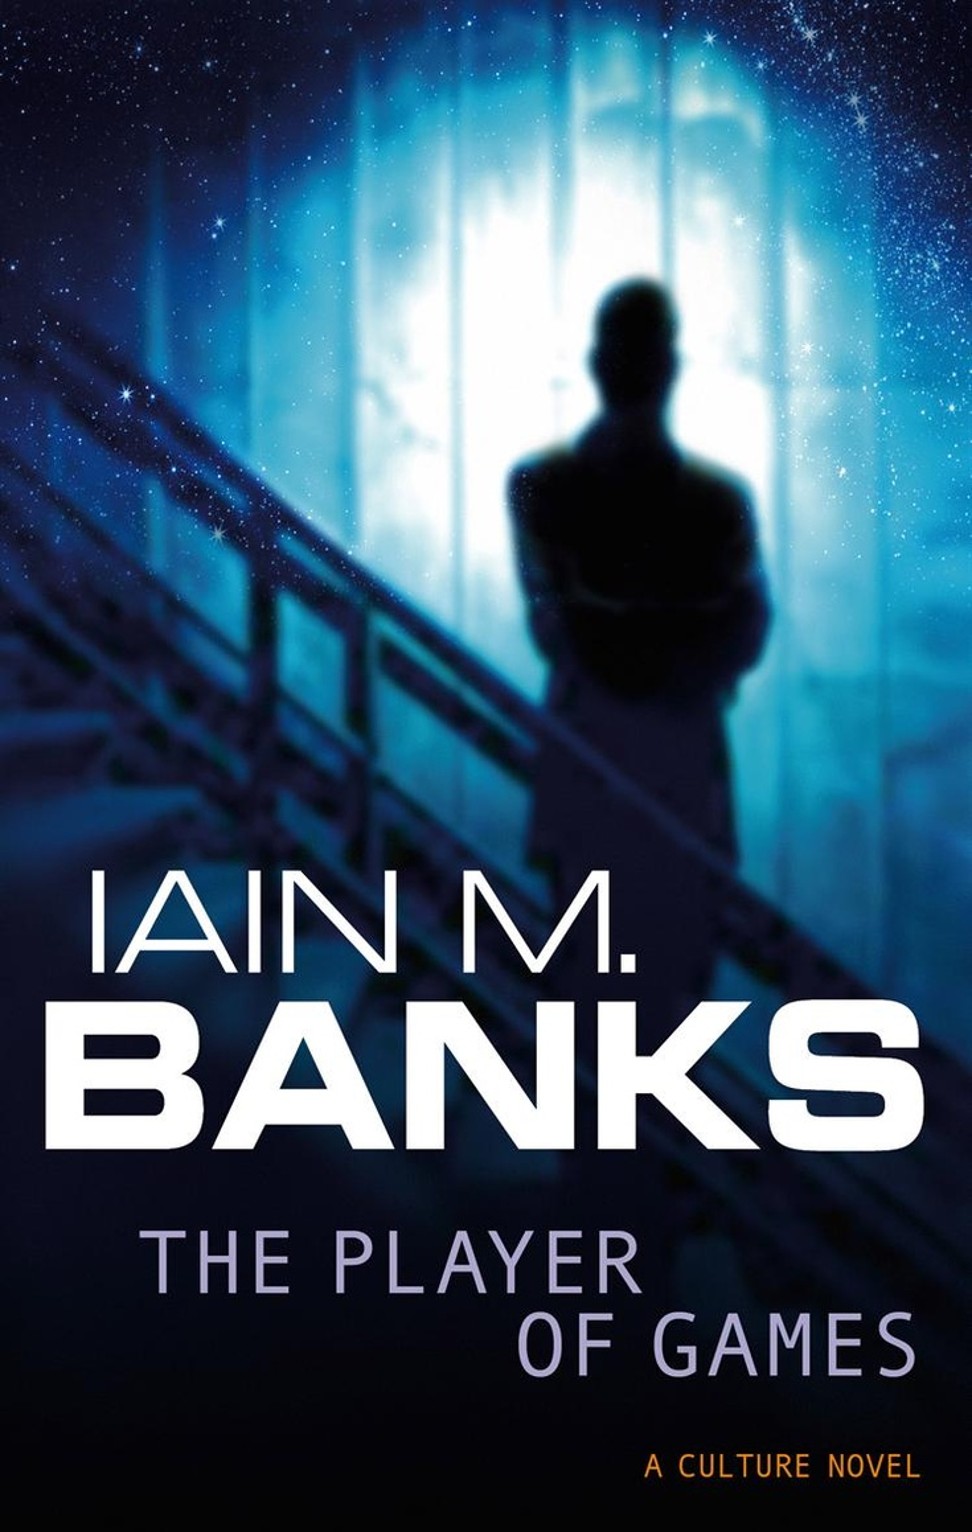 The Player of Games, part of The Culture series, by Iain M. Banks.